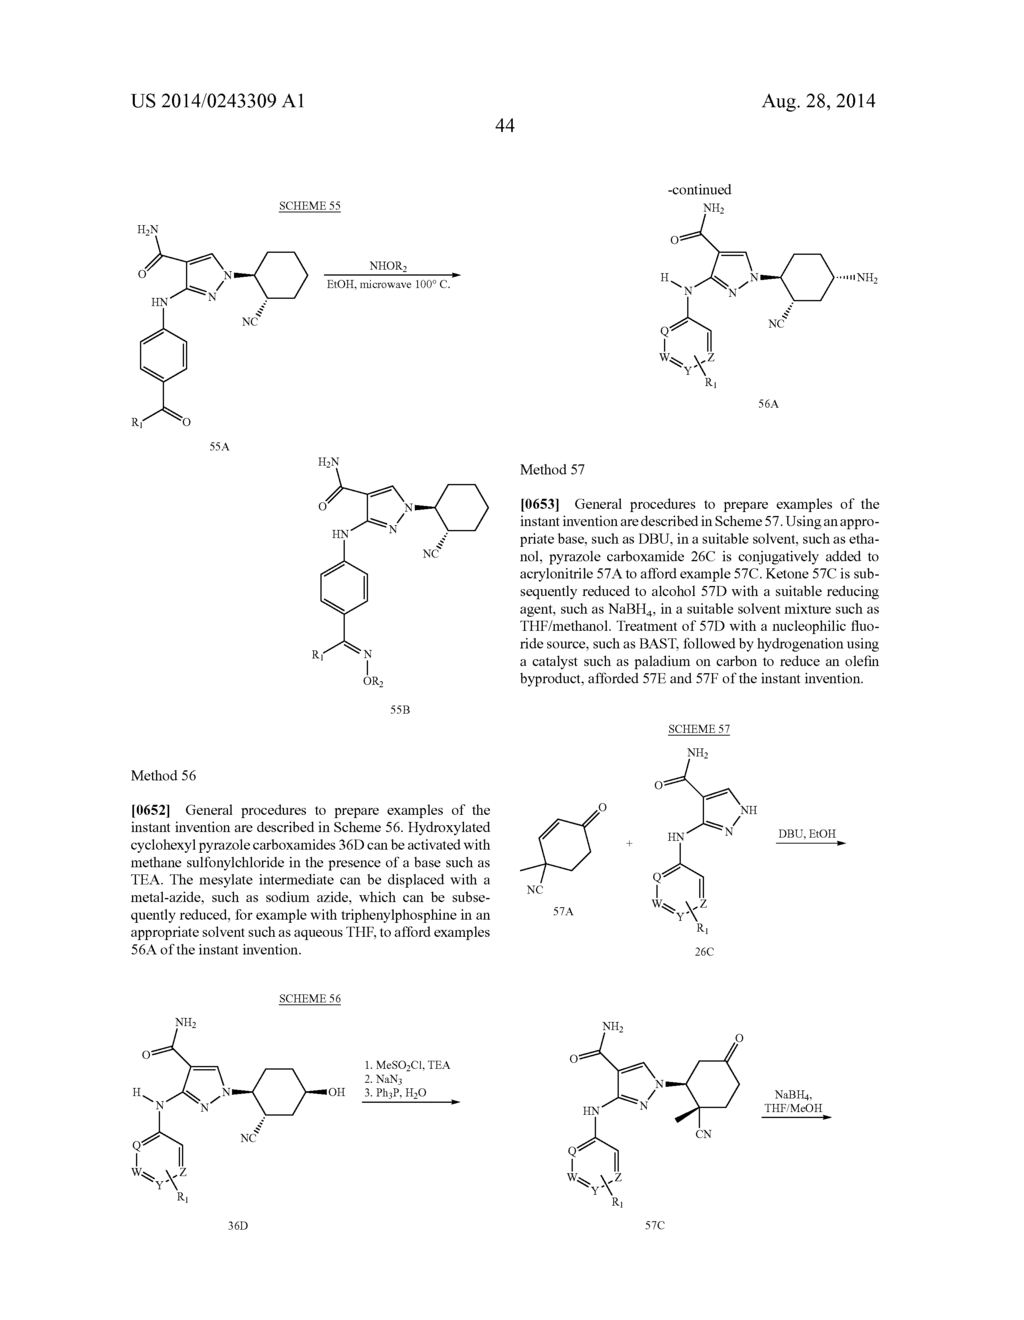 CYCLOALKYLNITRILE PYRAZOLE CARBOXAMIDES AS JANUS KINASE INHIBITORS - diagram, schematic, and image 45